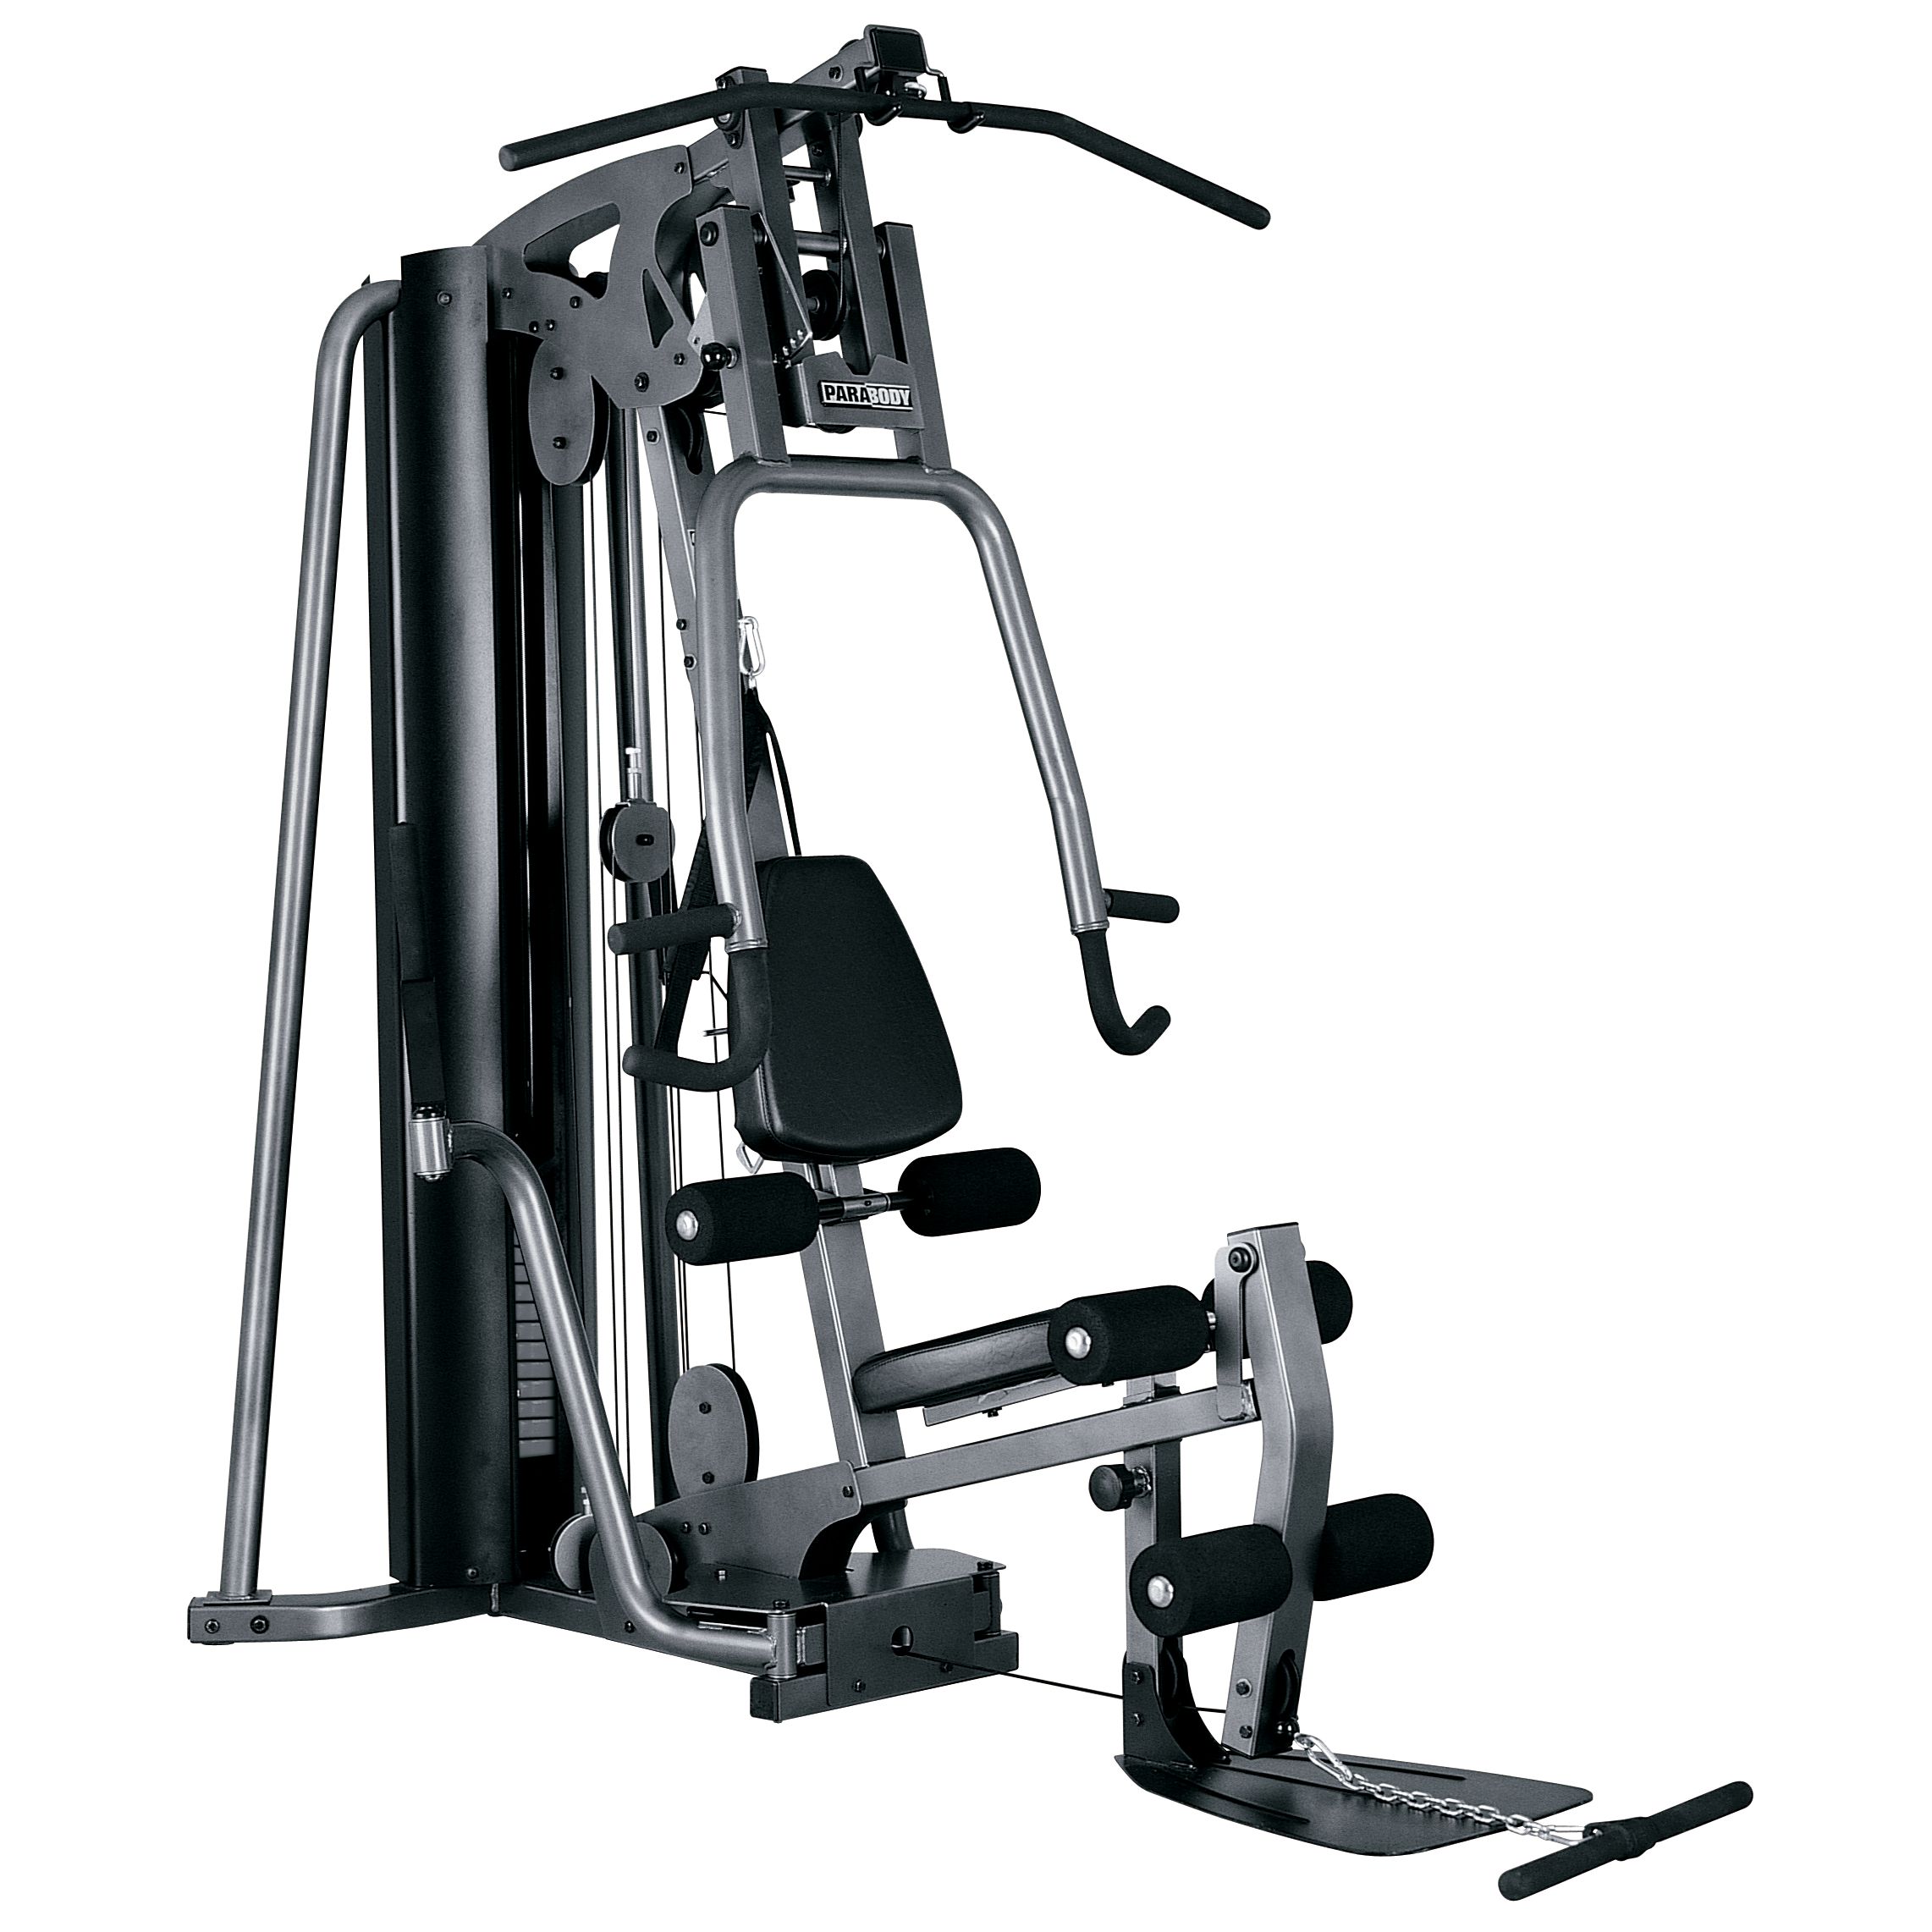 Life Fitness Parabody GS4 MultiGym at John Lewis